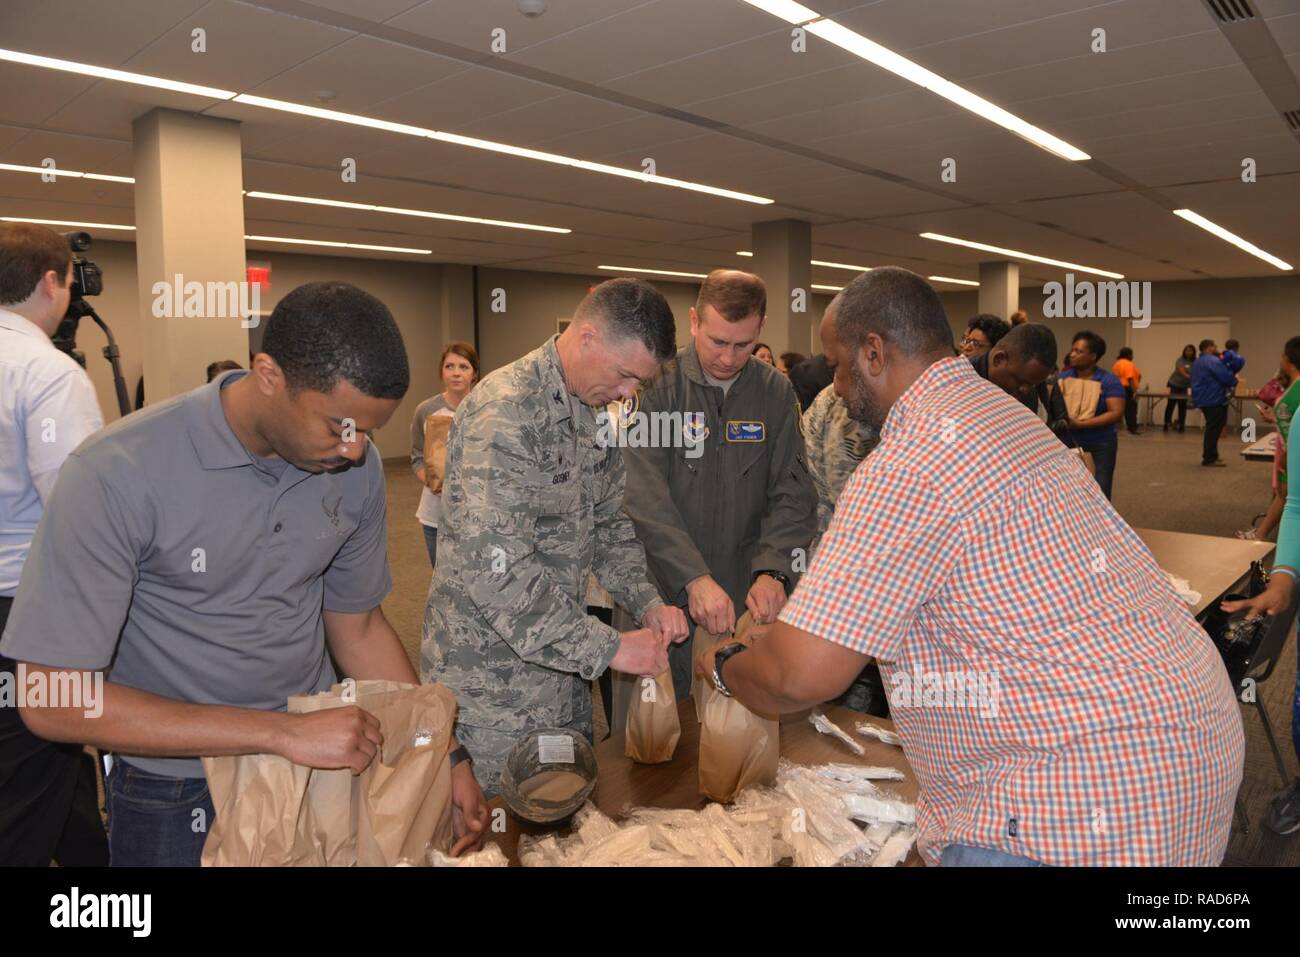 Columbus community members, including Col. Doug Gosney, 14th Flying Training Wing Commander, and Col. James Fisher, 14FTW Vice Wing Commander, pack bag lunches during the Dr. Martin Luther King Jr. Breakfast and Day of Giving event Jan. 16, 2017, in Columbus, Mississippi.  Members from Columbus Air Force Base, the City of Columbus, the Columbus-Lowndes Convention and Visitors Bureau, Lowndes County Board of Supervisors, Mississippi University for Women, Sodexo Food Services, and the United Way of Lowndes County all participated in the event to show their support. Stock Photo